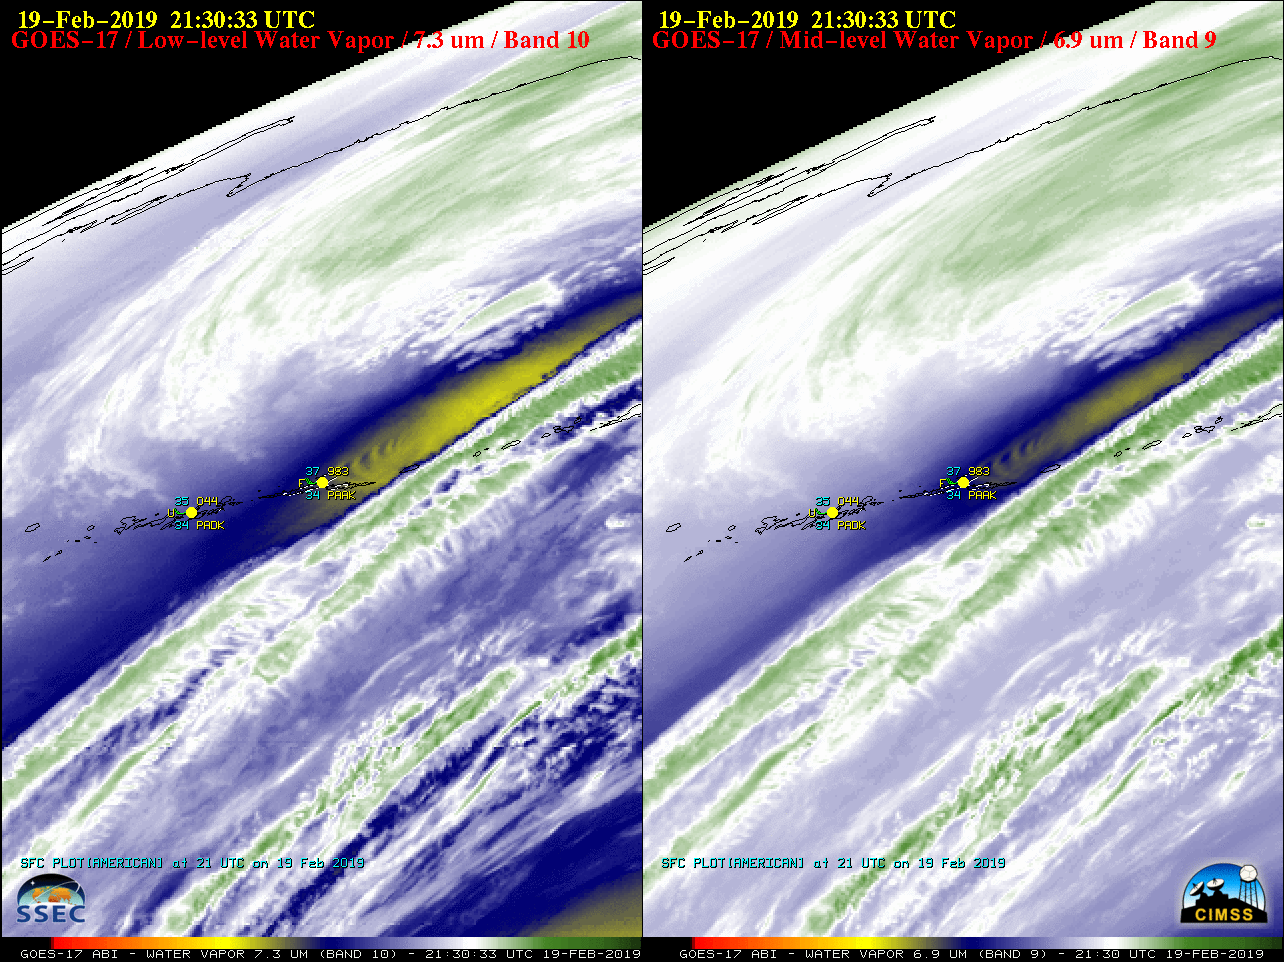 GOES-17 Low-level (7.3 µm) and Mid-level (6.9 µm) Water Vapor images [click to play animation]